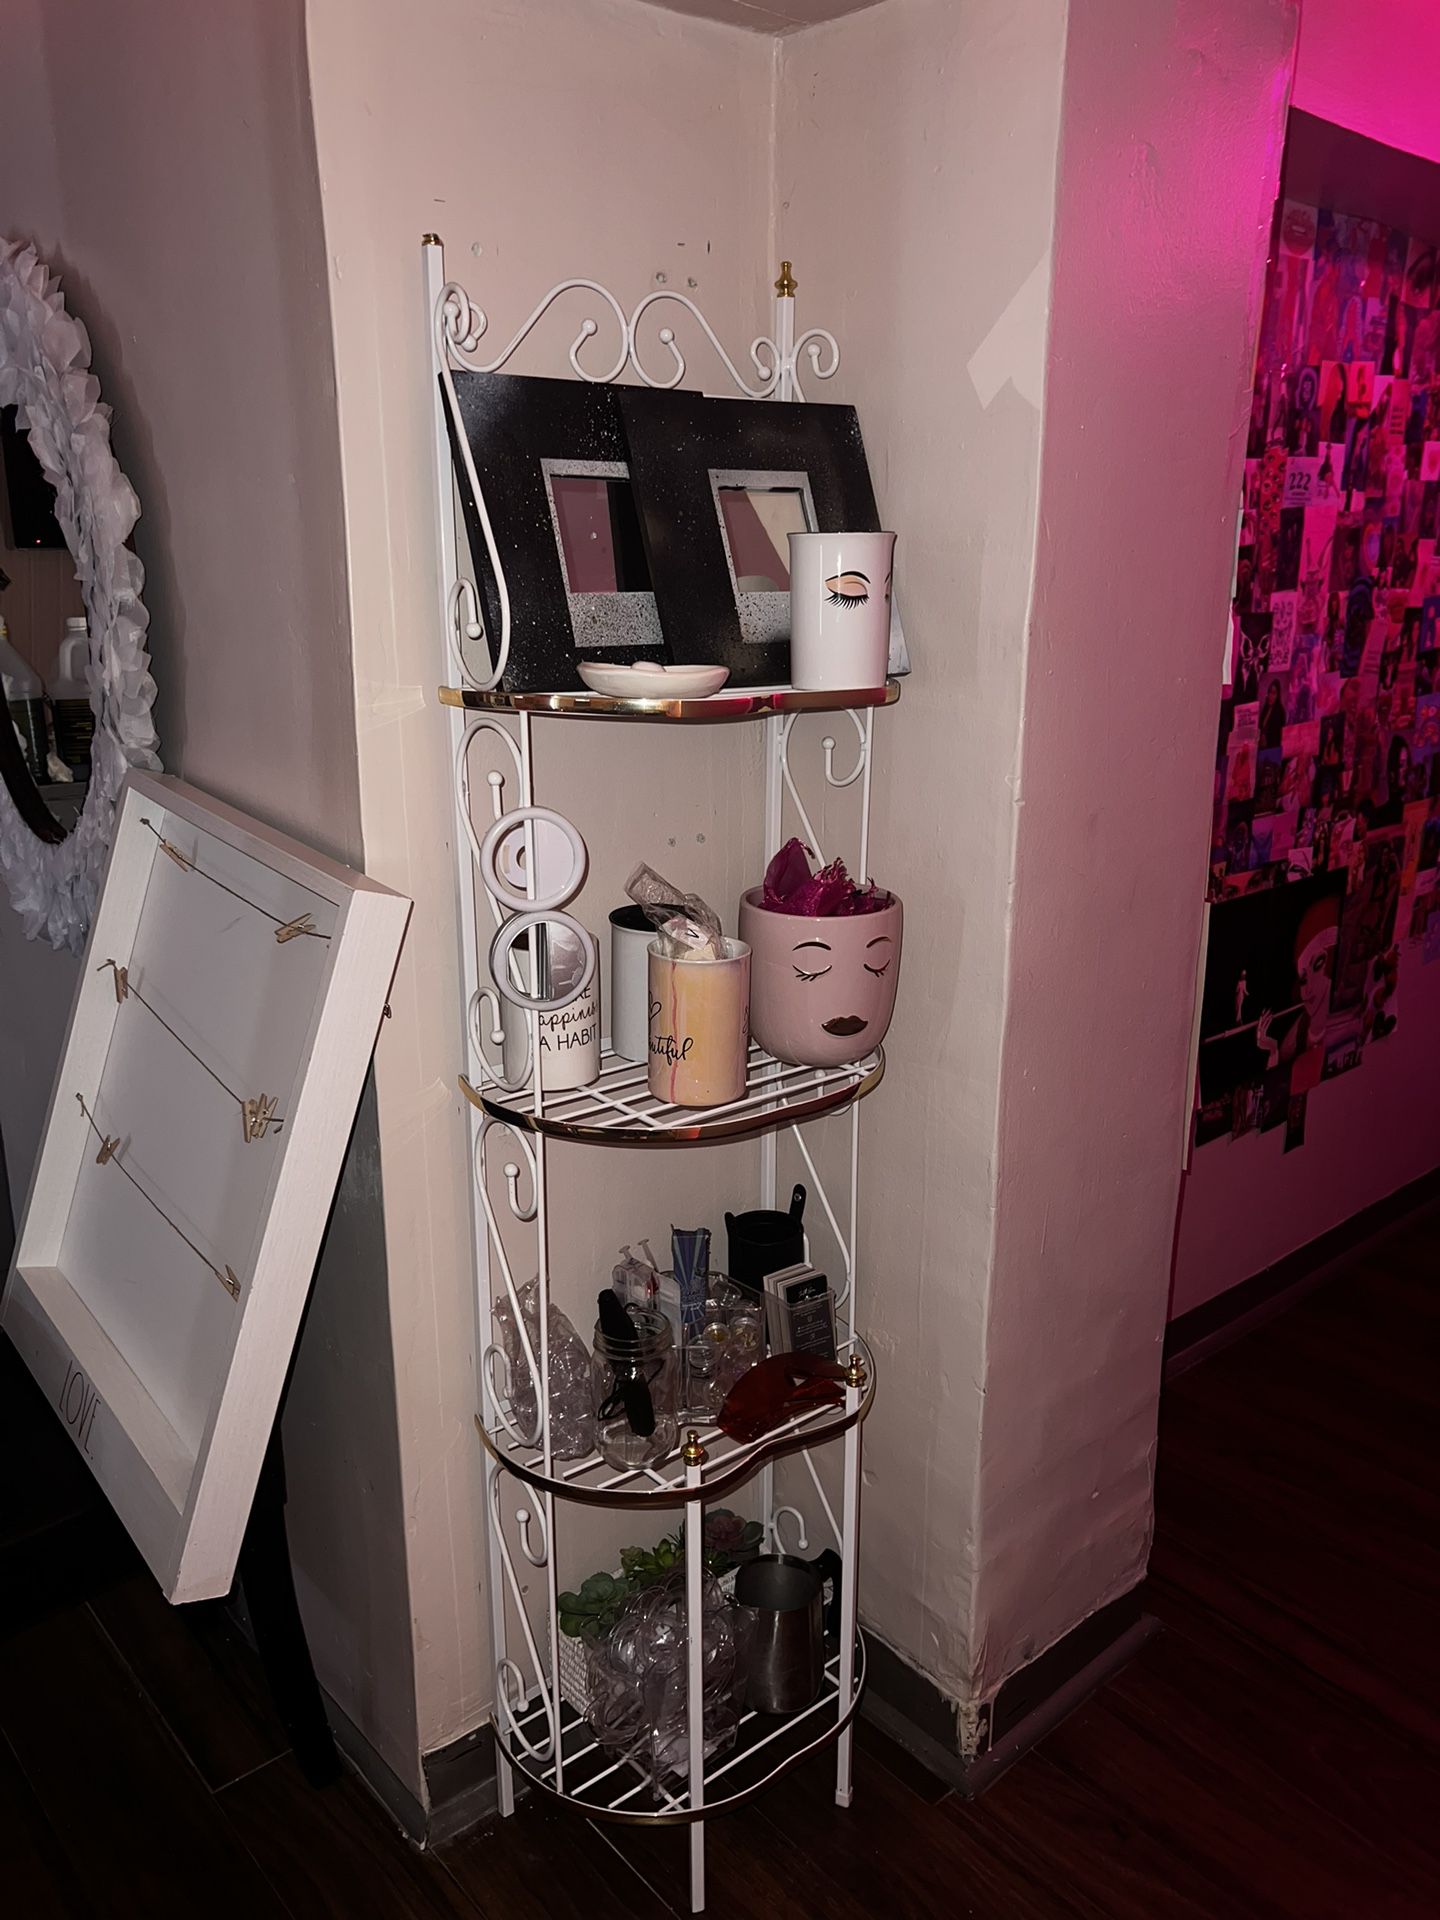 Tall Rack/ Stand For Decor Items